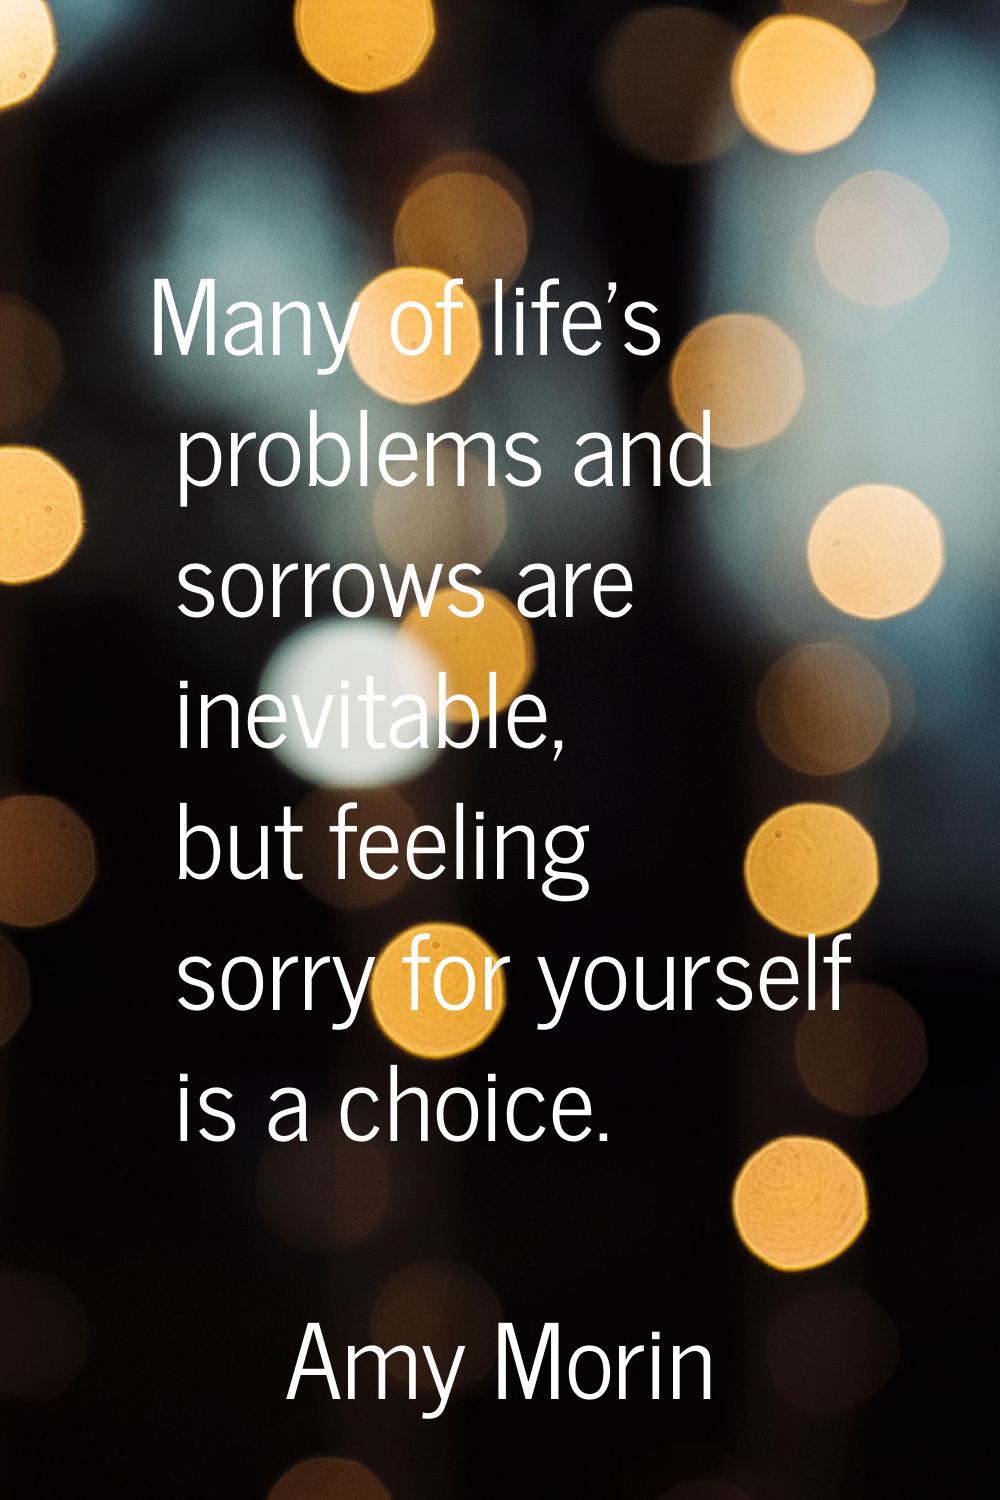 Many of life's problems and sorrows are inevitable, but feeling sorry for yourself is a choice.